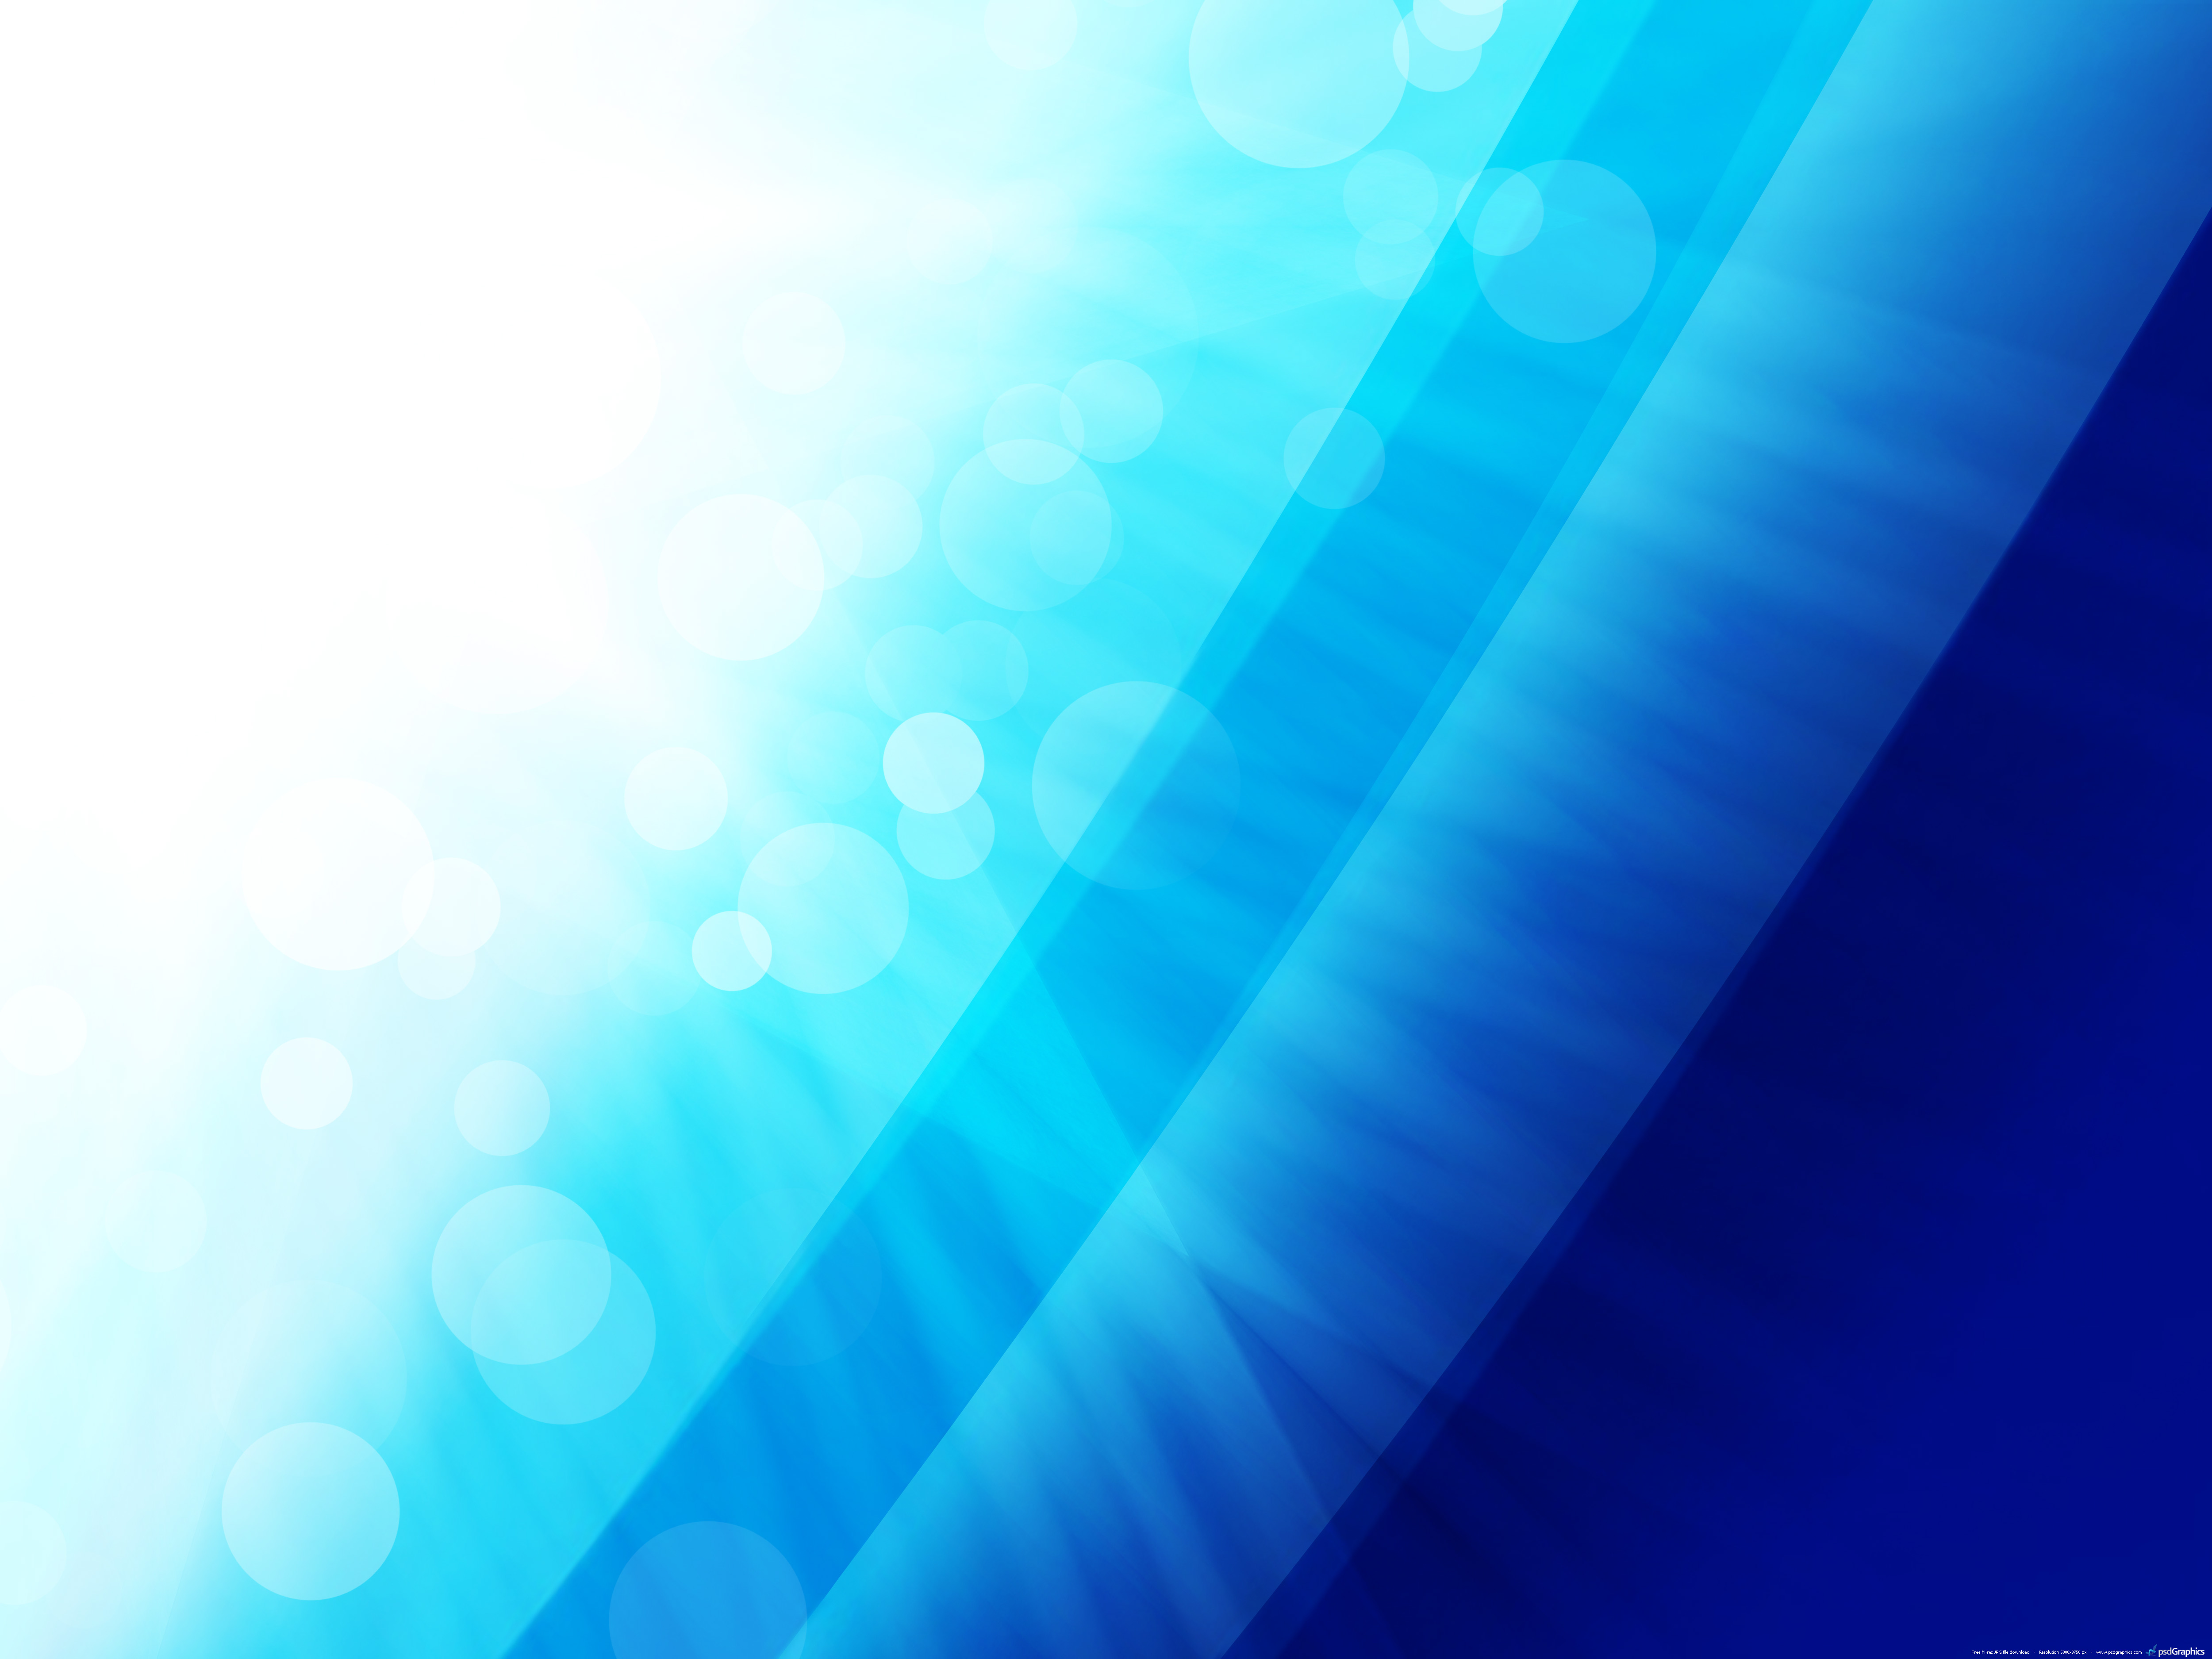 Light Blue and White Graphic Background Wallpaper